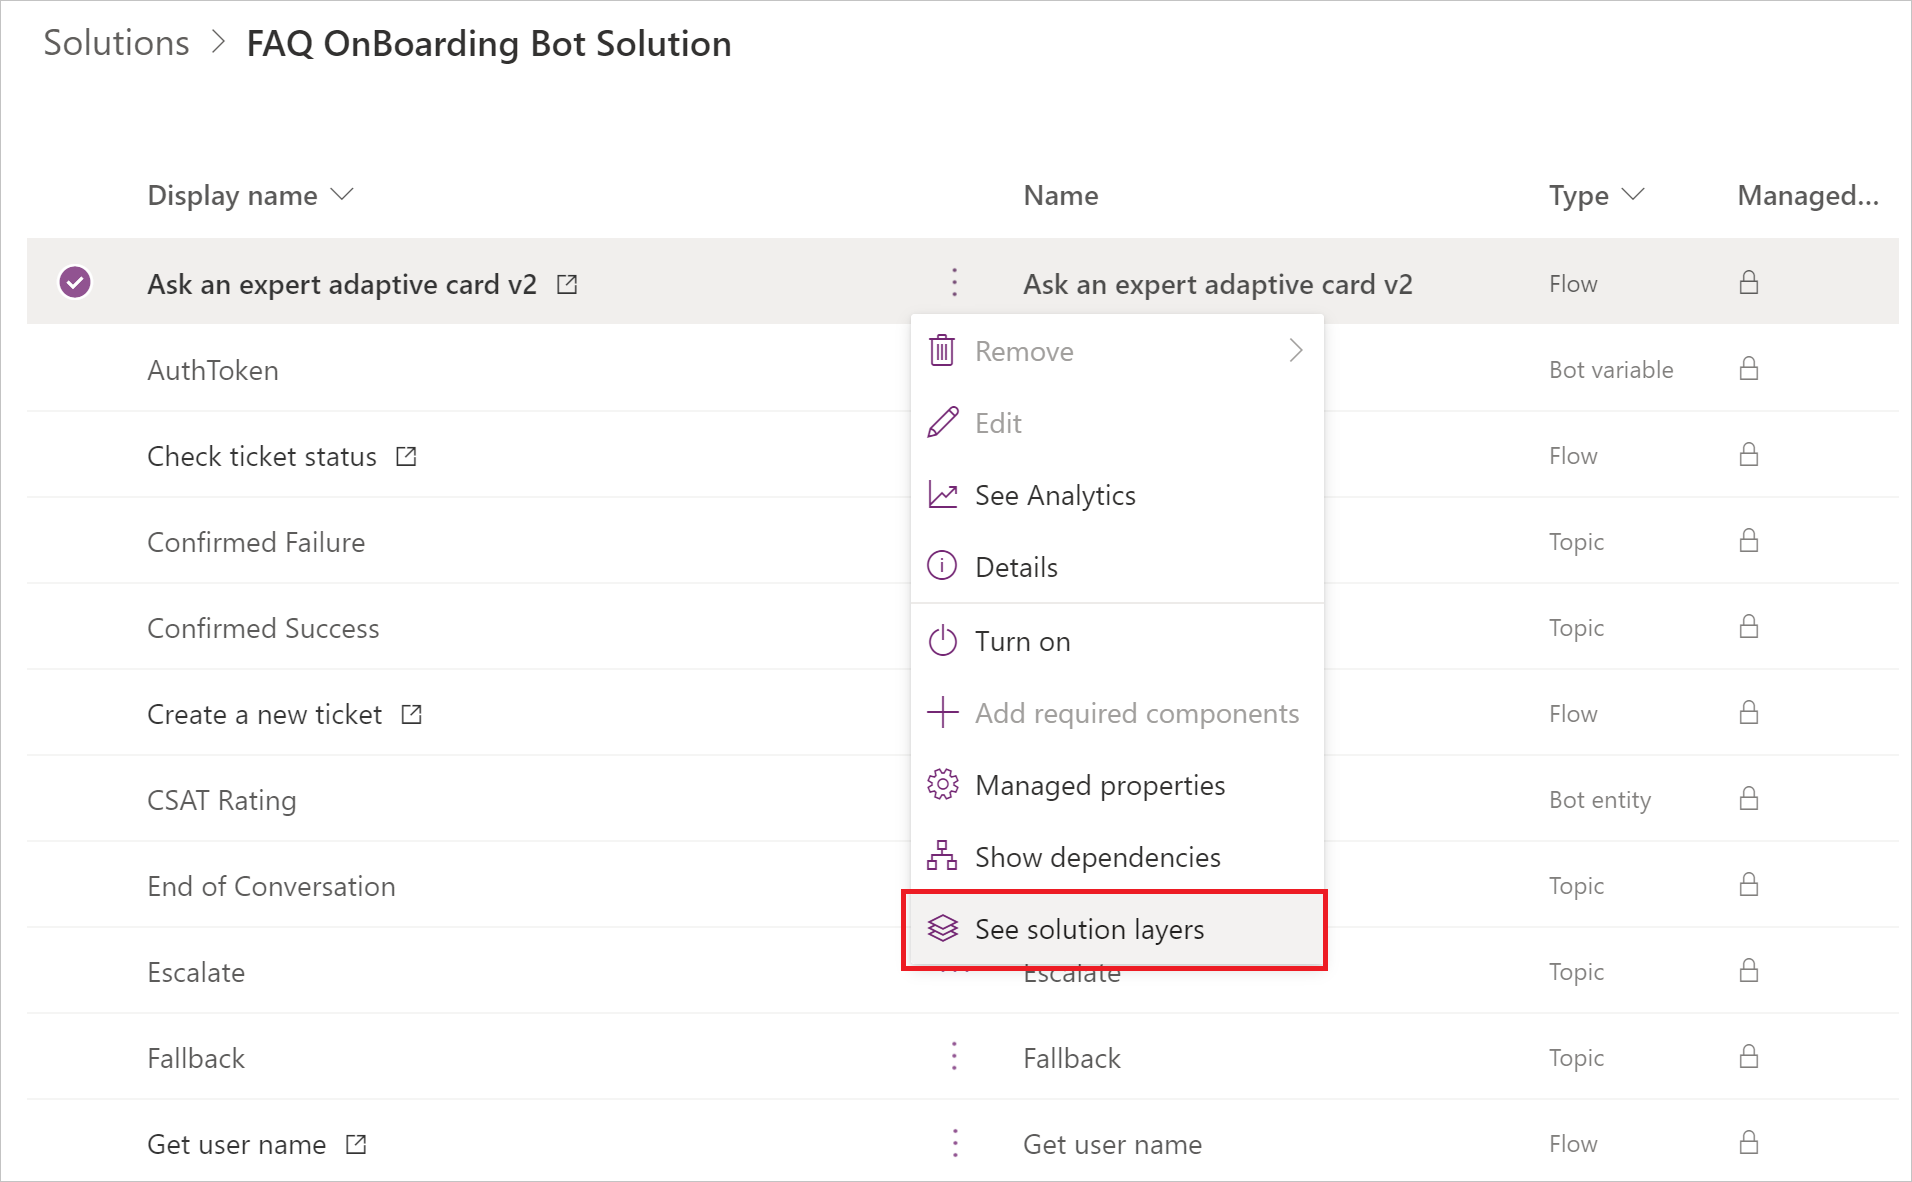 See solution layers option.